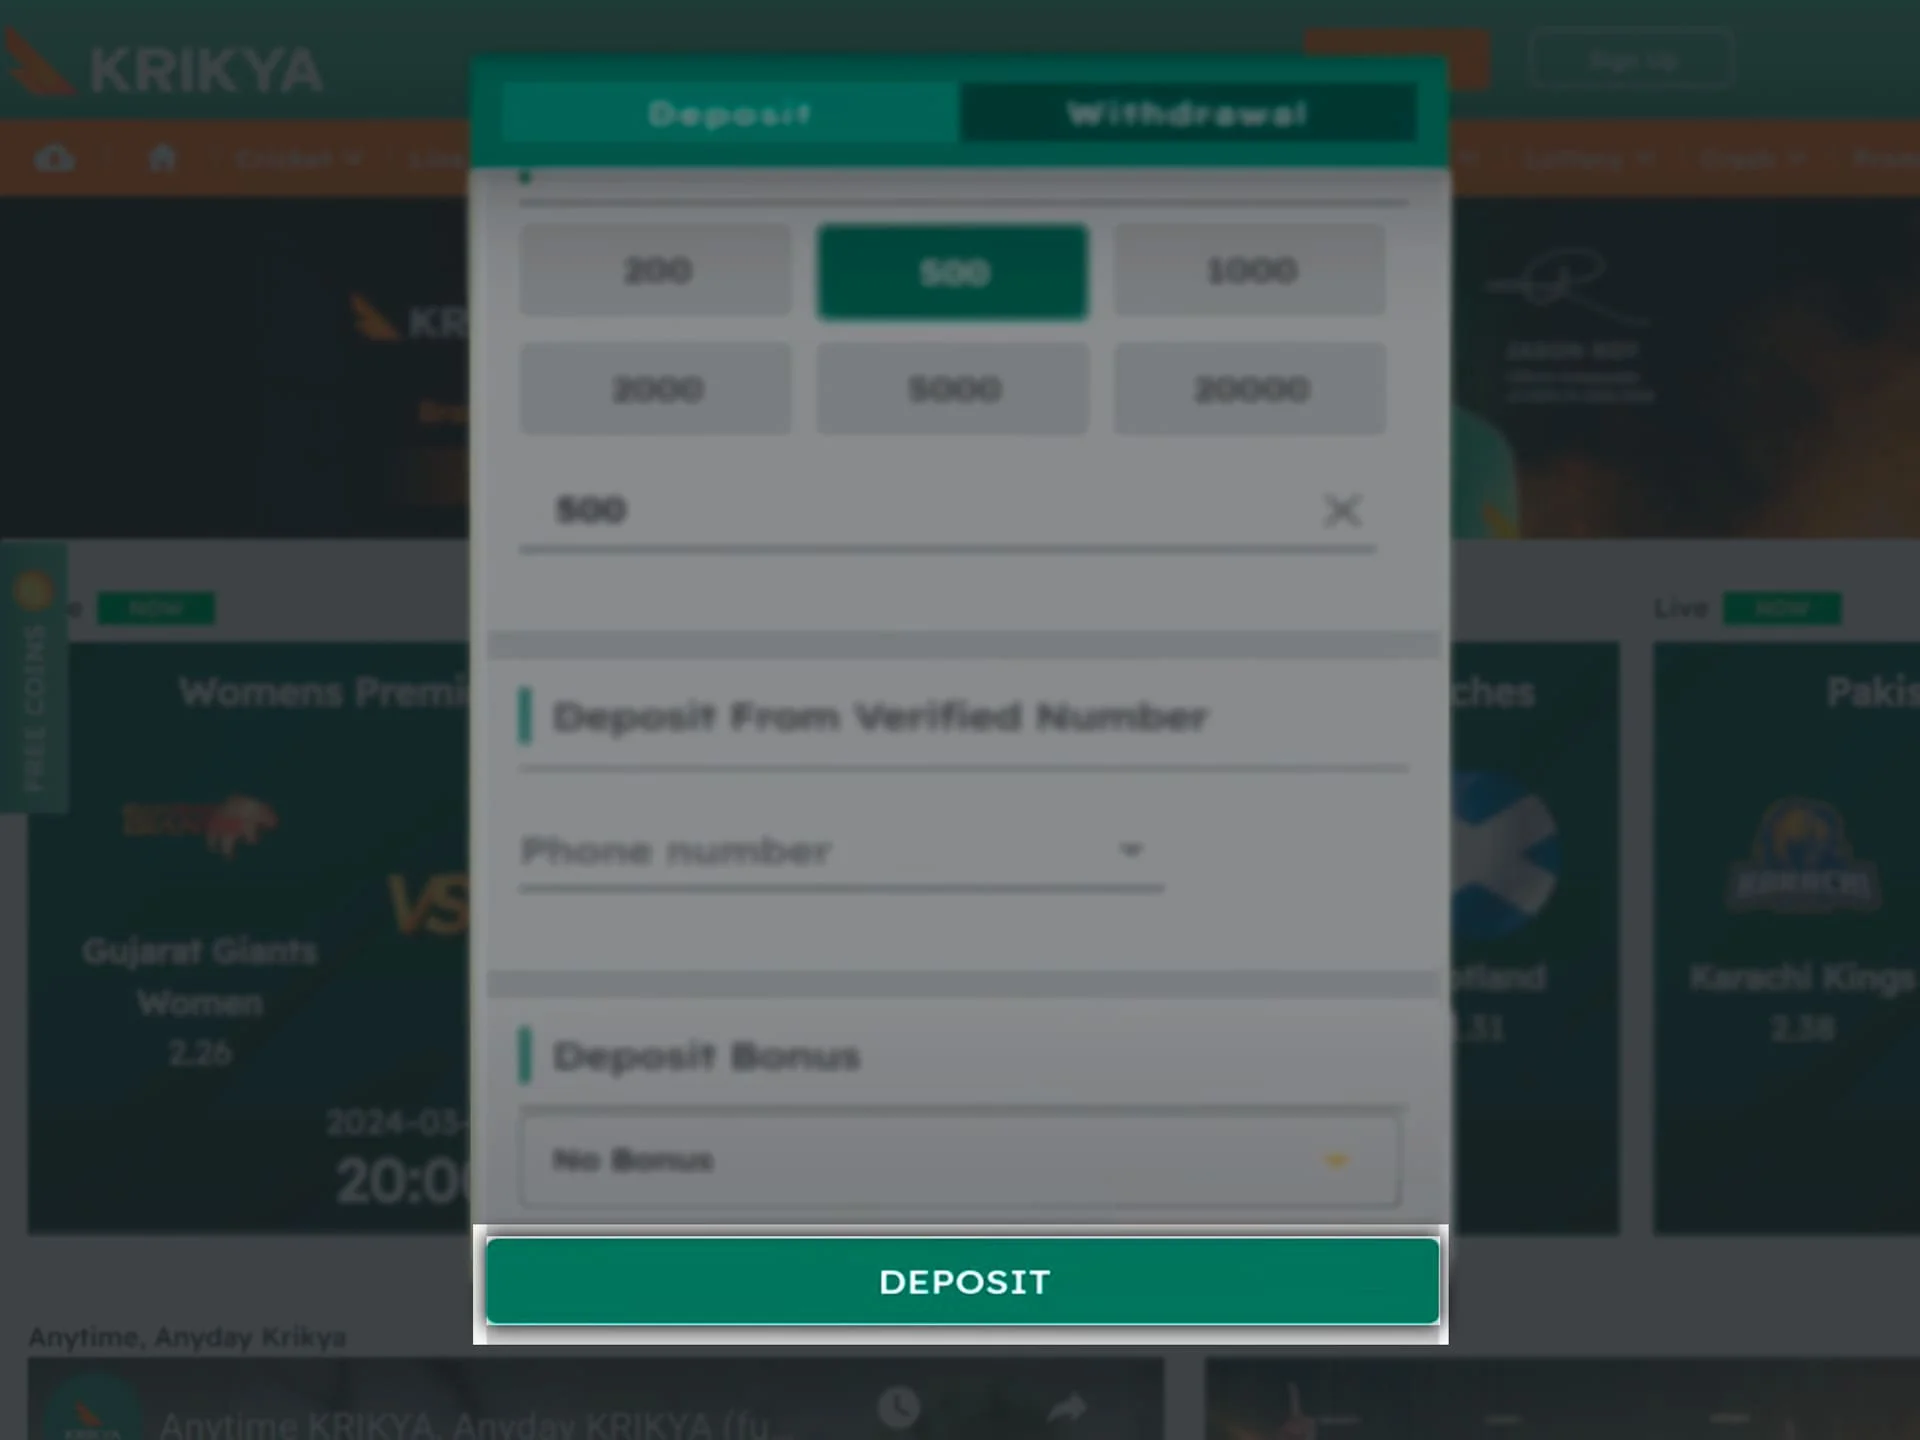 Enter the remaining details and confirm the funding of your Krikya account.